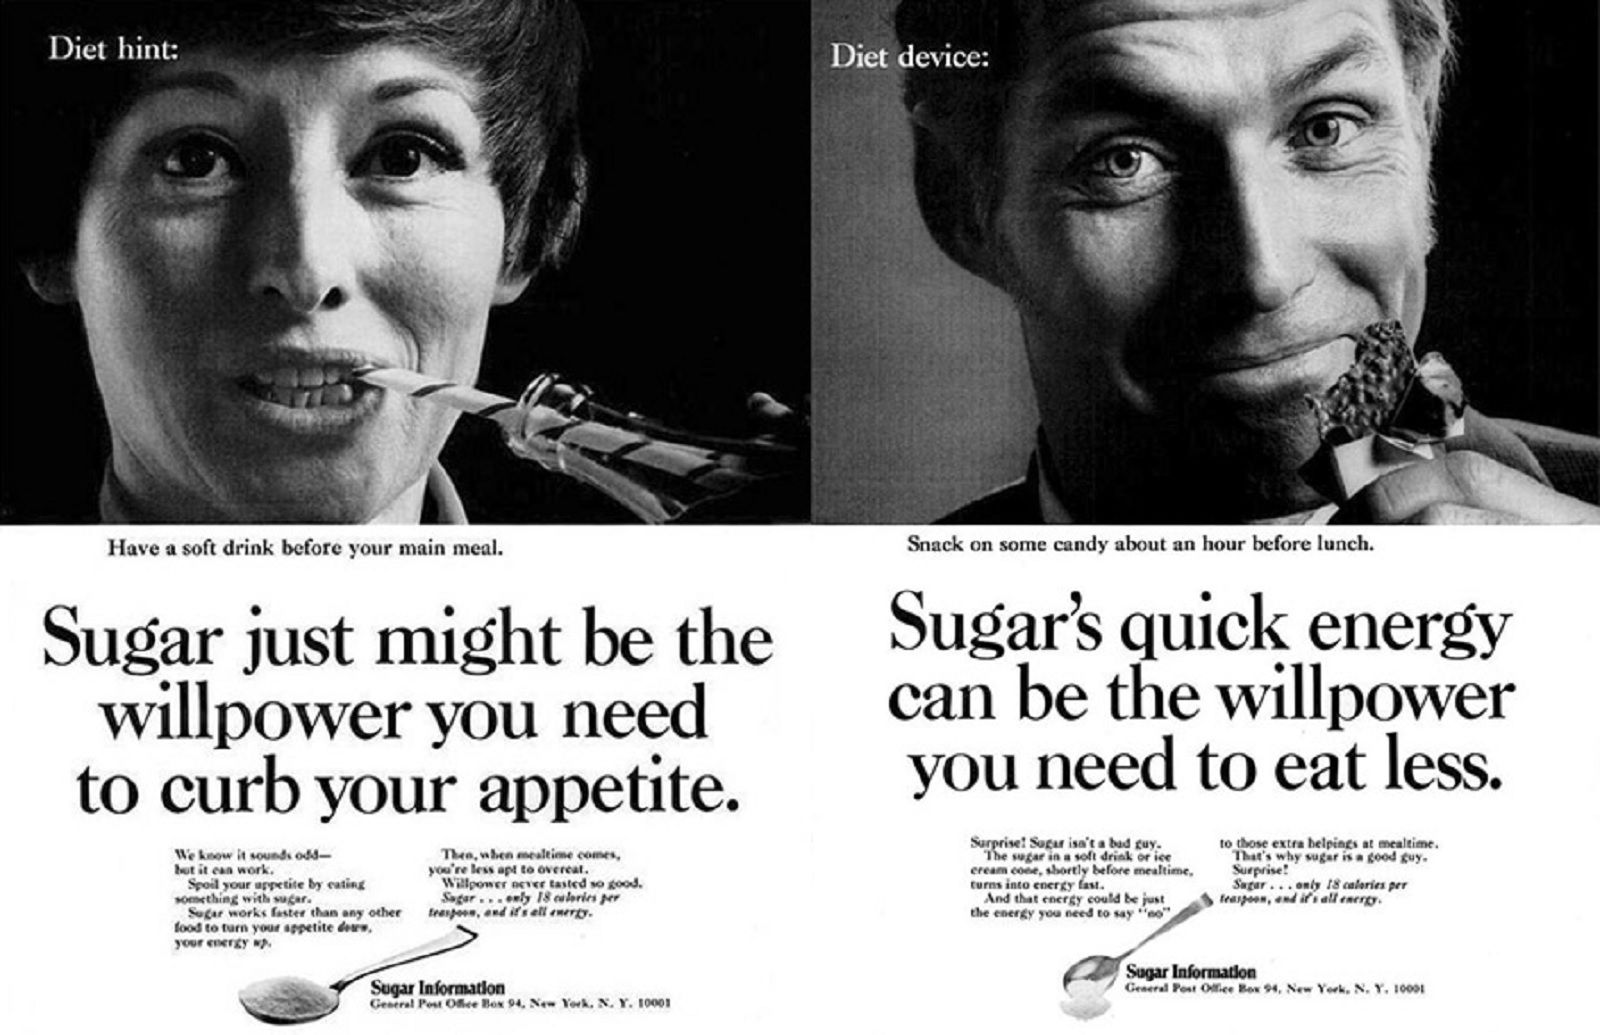 Some of the craziest adverts you're ever likely to see photo 9